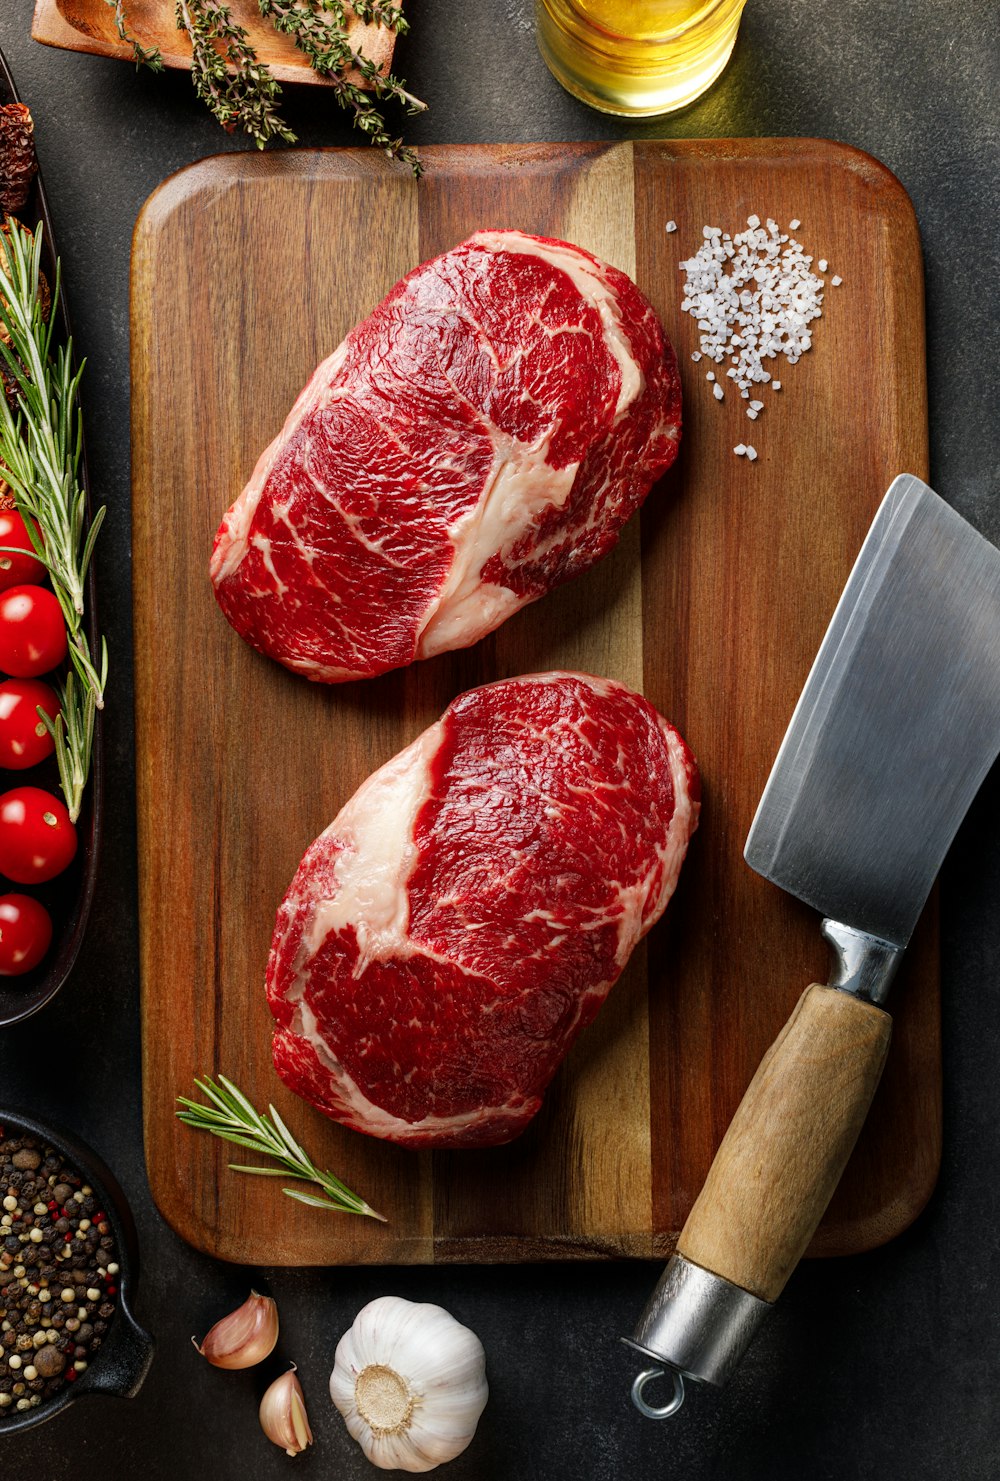 Premium Photo  Raw pieces of beef on a cutting board with a knife